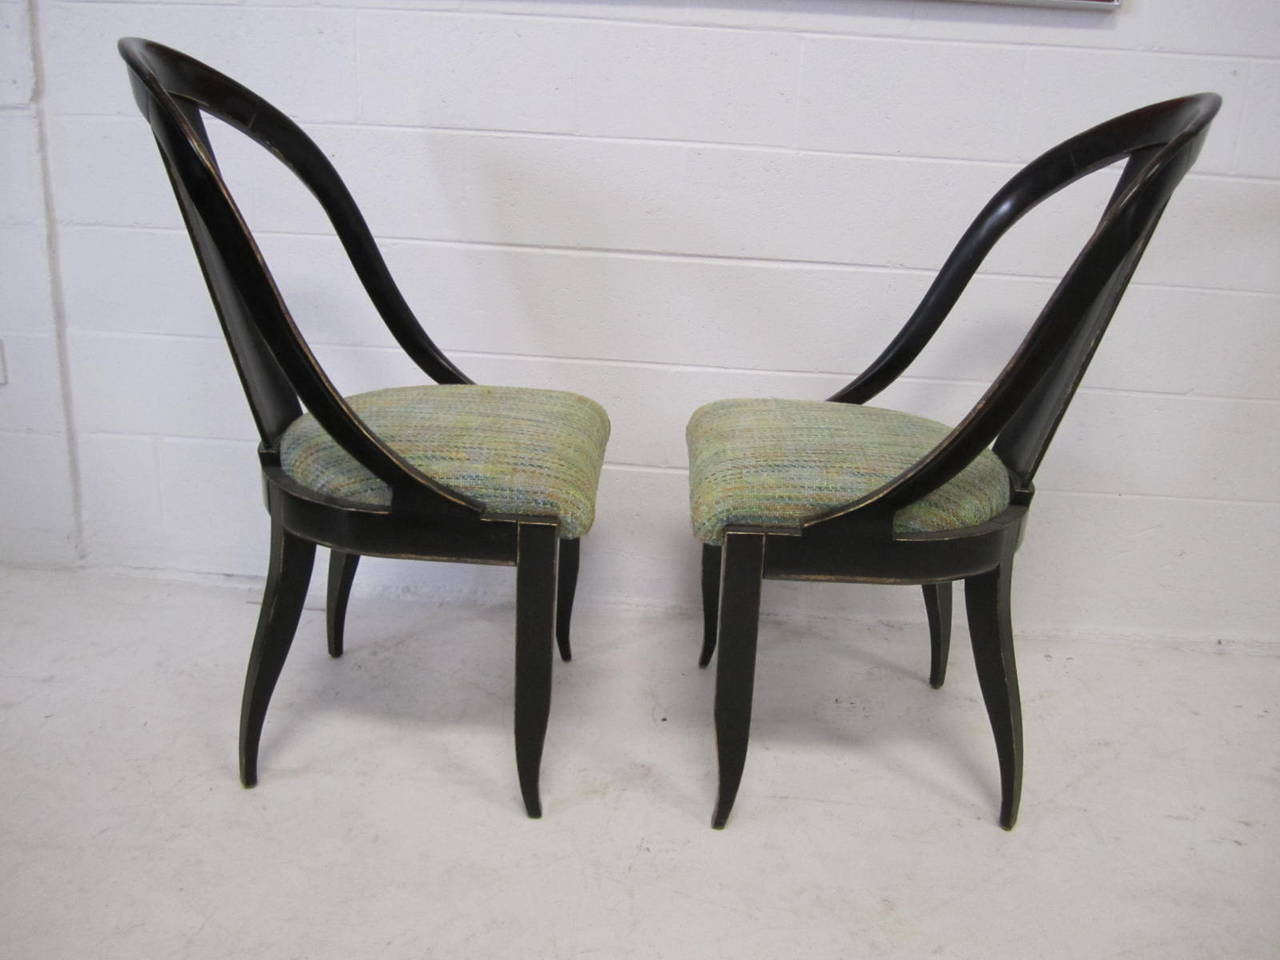 Sensuous pair of spoon back side chairs made by Swaim. Gorgeous scale and craftsmanship, these chairs are spectacular in person. The finish is a very dark almost black lacquer with a bit of wood grain showing through. The edges are all antiqued with